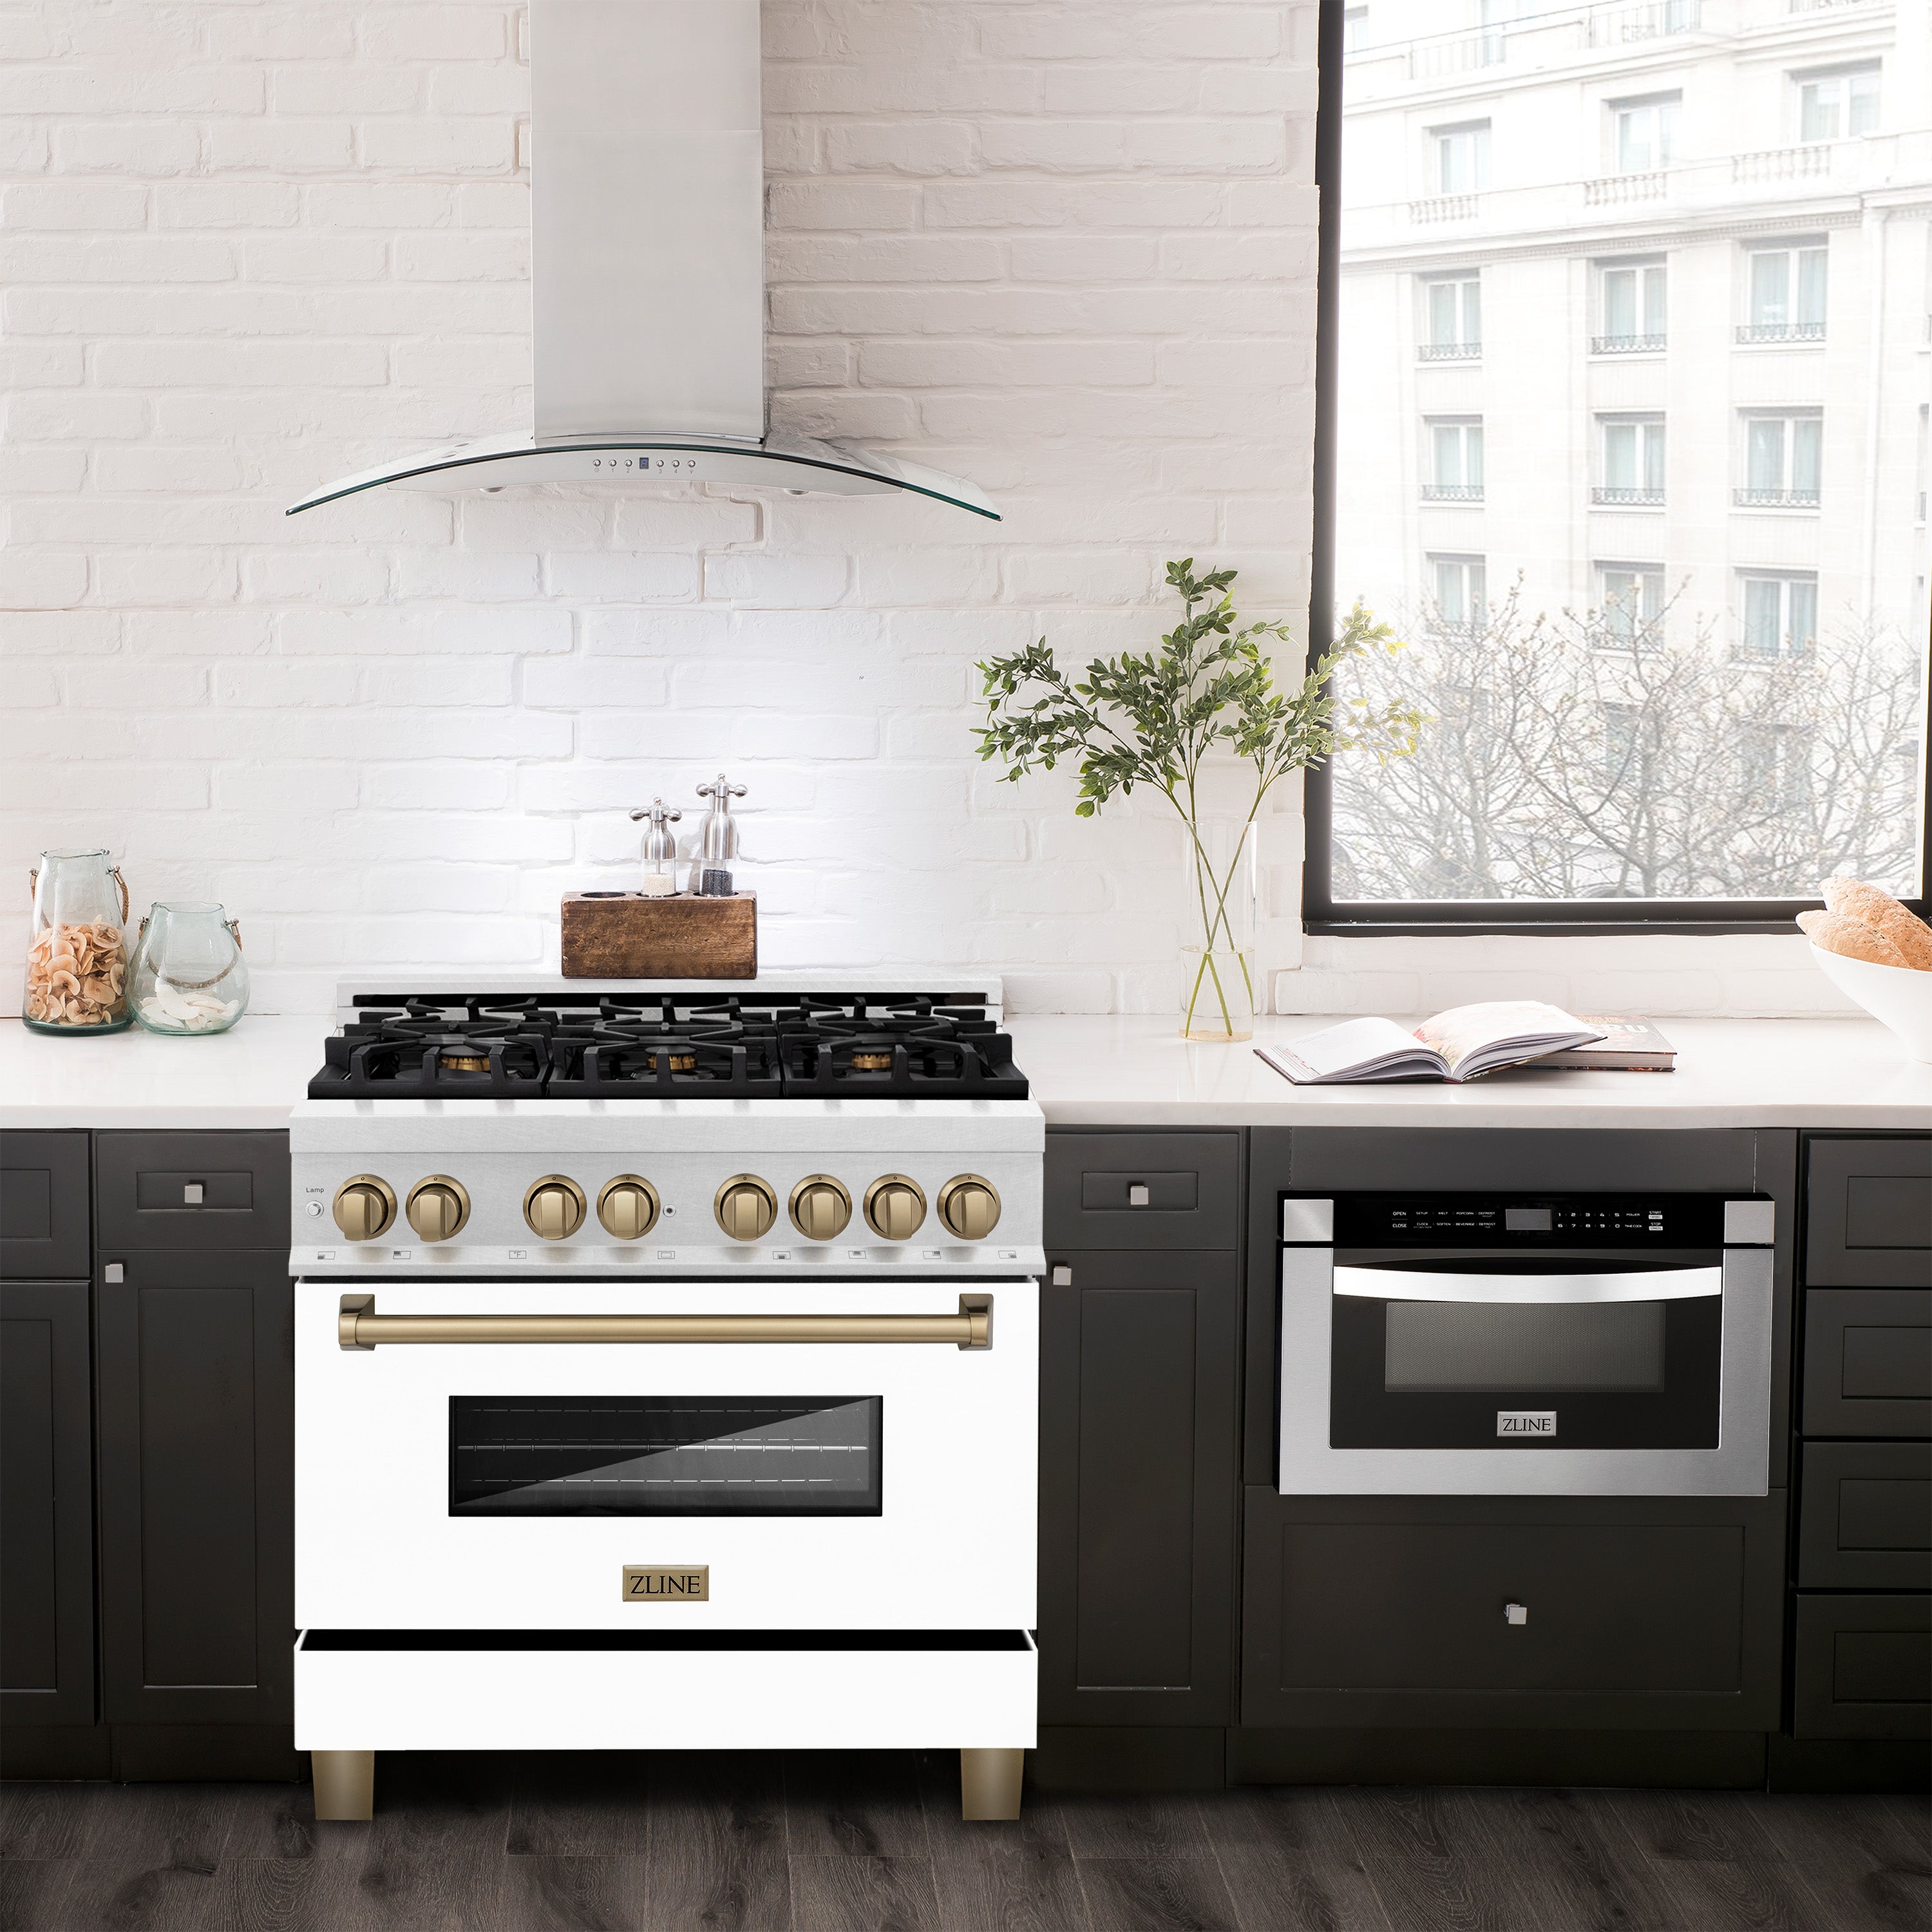 ZLINE Autograph Edition 36" 4.6 cu. ft. Dual Fuel Range with Gas Stove and Electric Oven in DuraSnow® Stainless Steel with White Matte Door and Champagne Bronze Accents (RASZ-WM-36-CB)